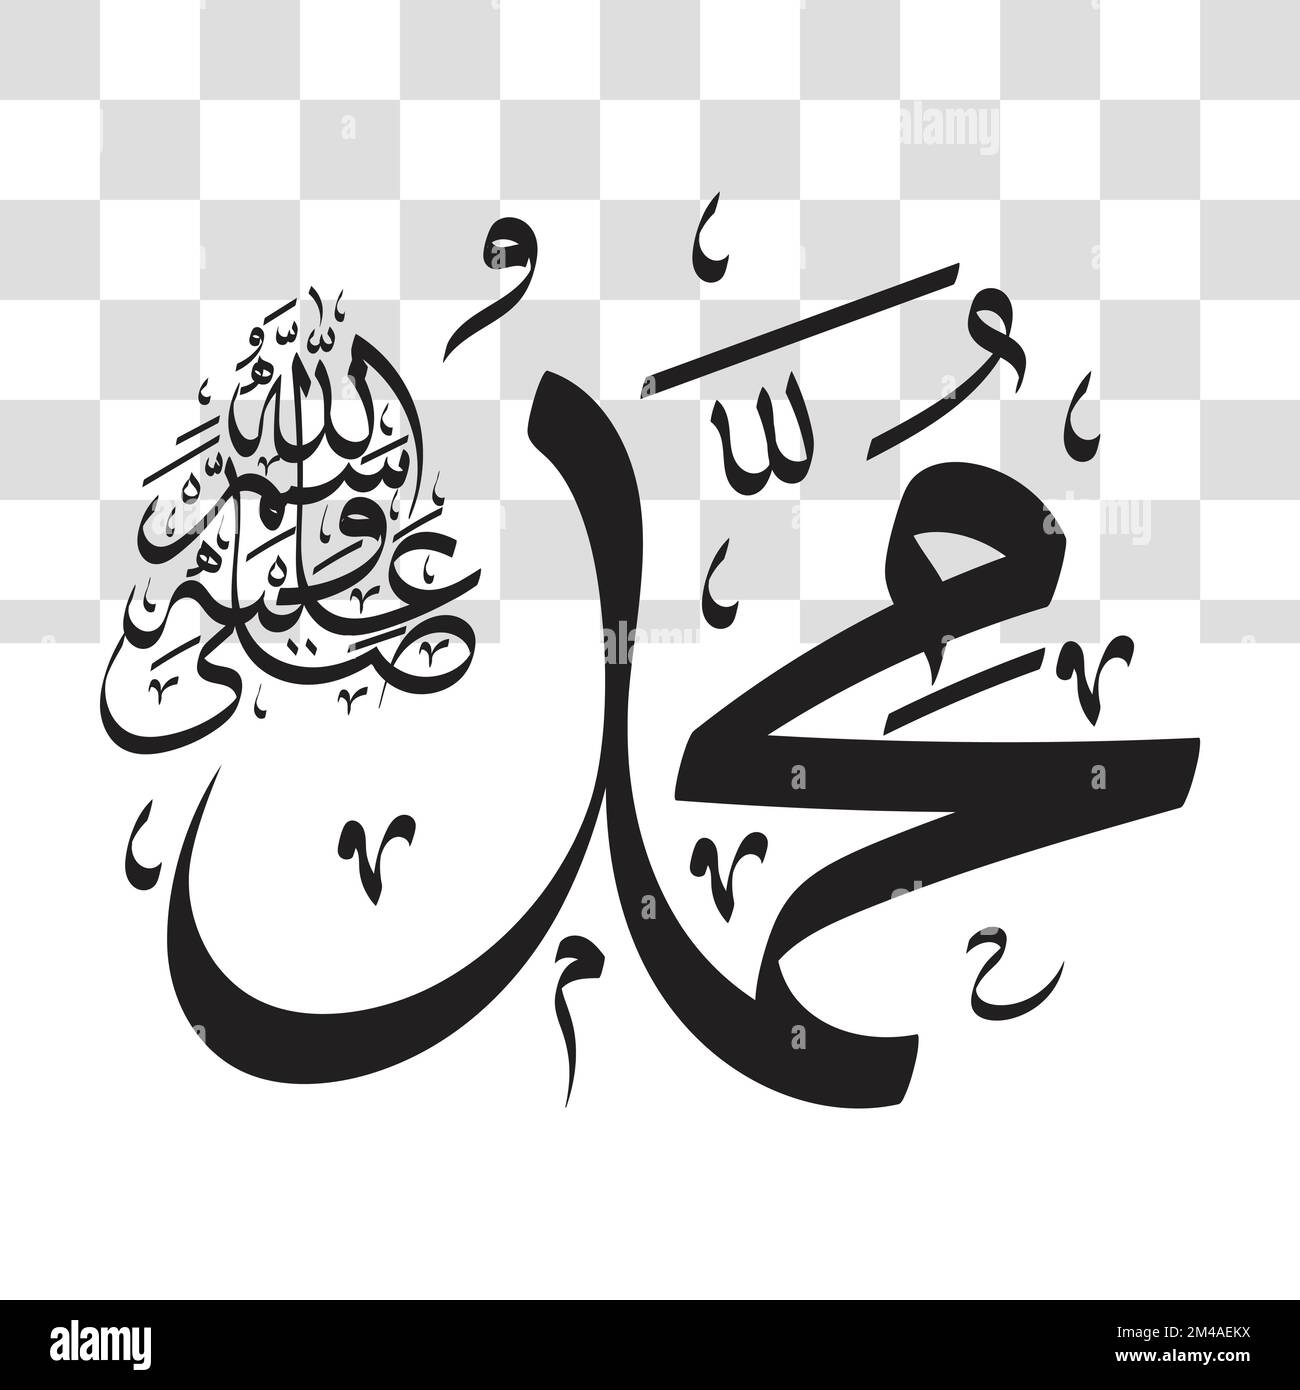 Allah Black and White Stock Photos & Images - Alamy